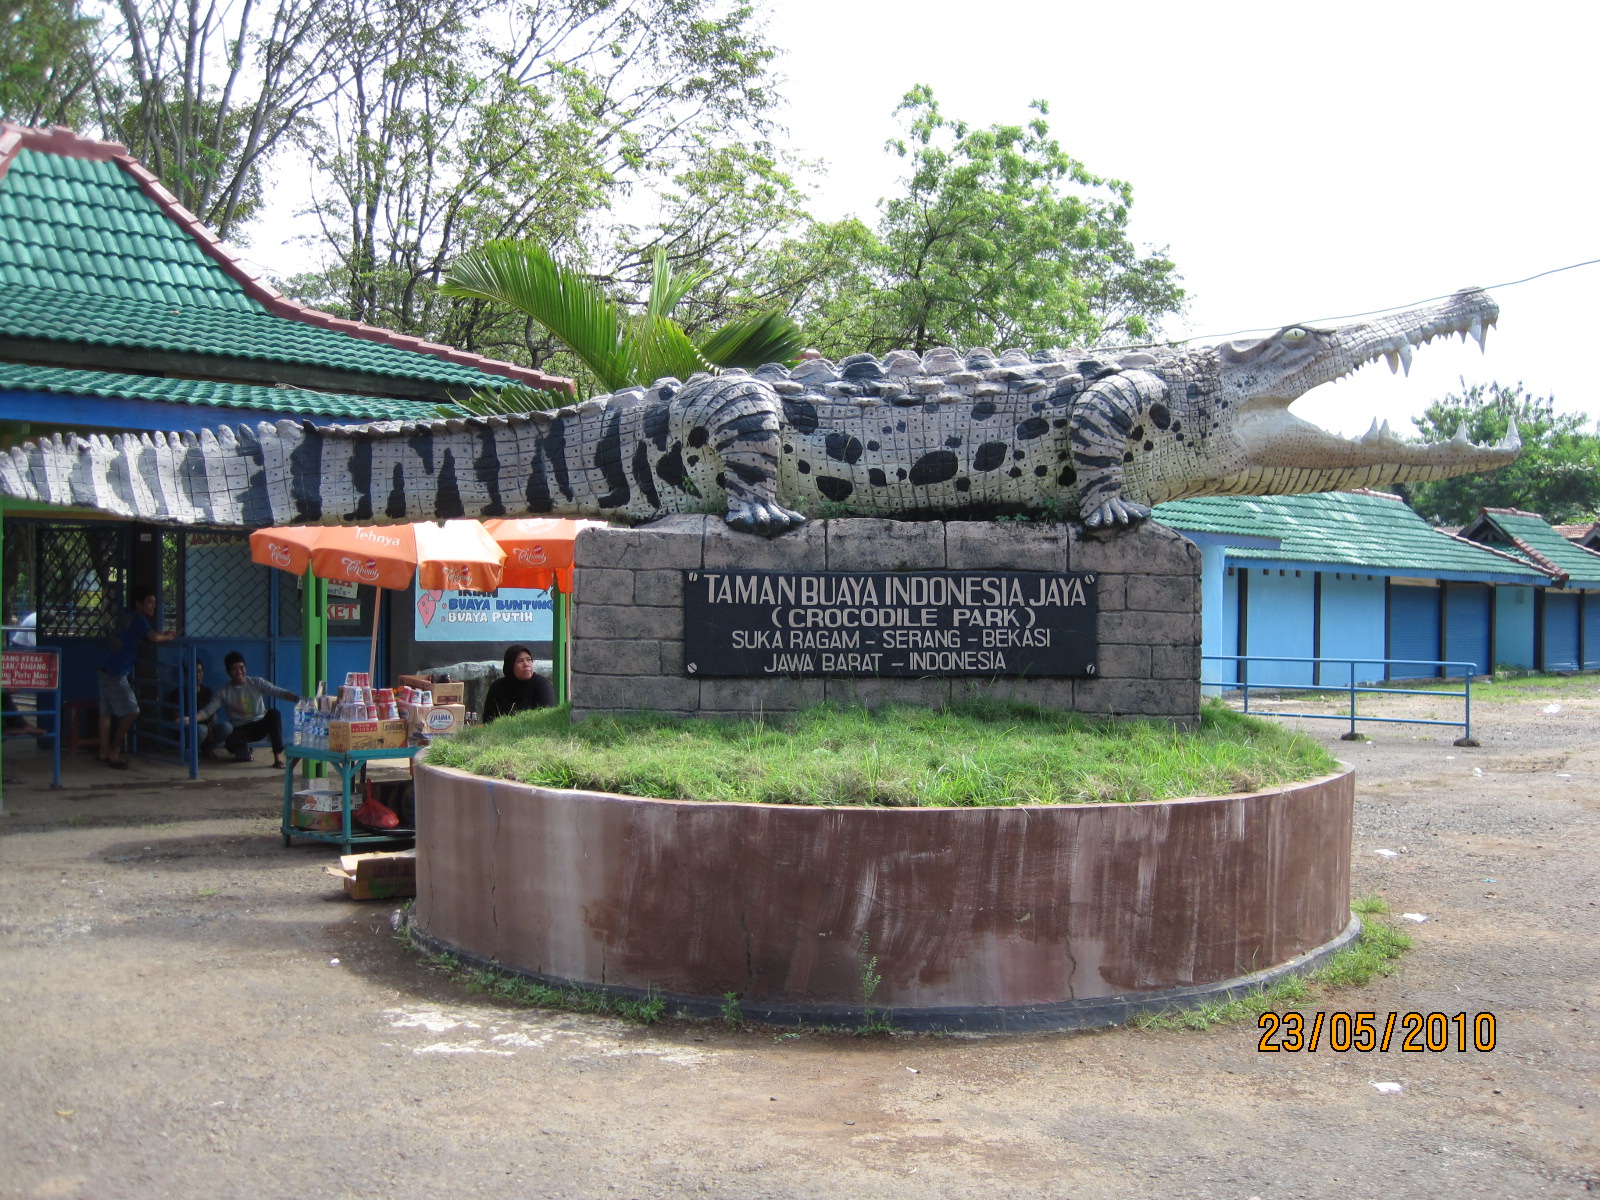 Wildlife crocodile be e tourist attractions in Bekasi which must be visited Here we can see the crocodiles of various sizes located on Jalan Raya Serang